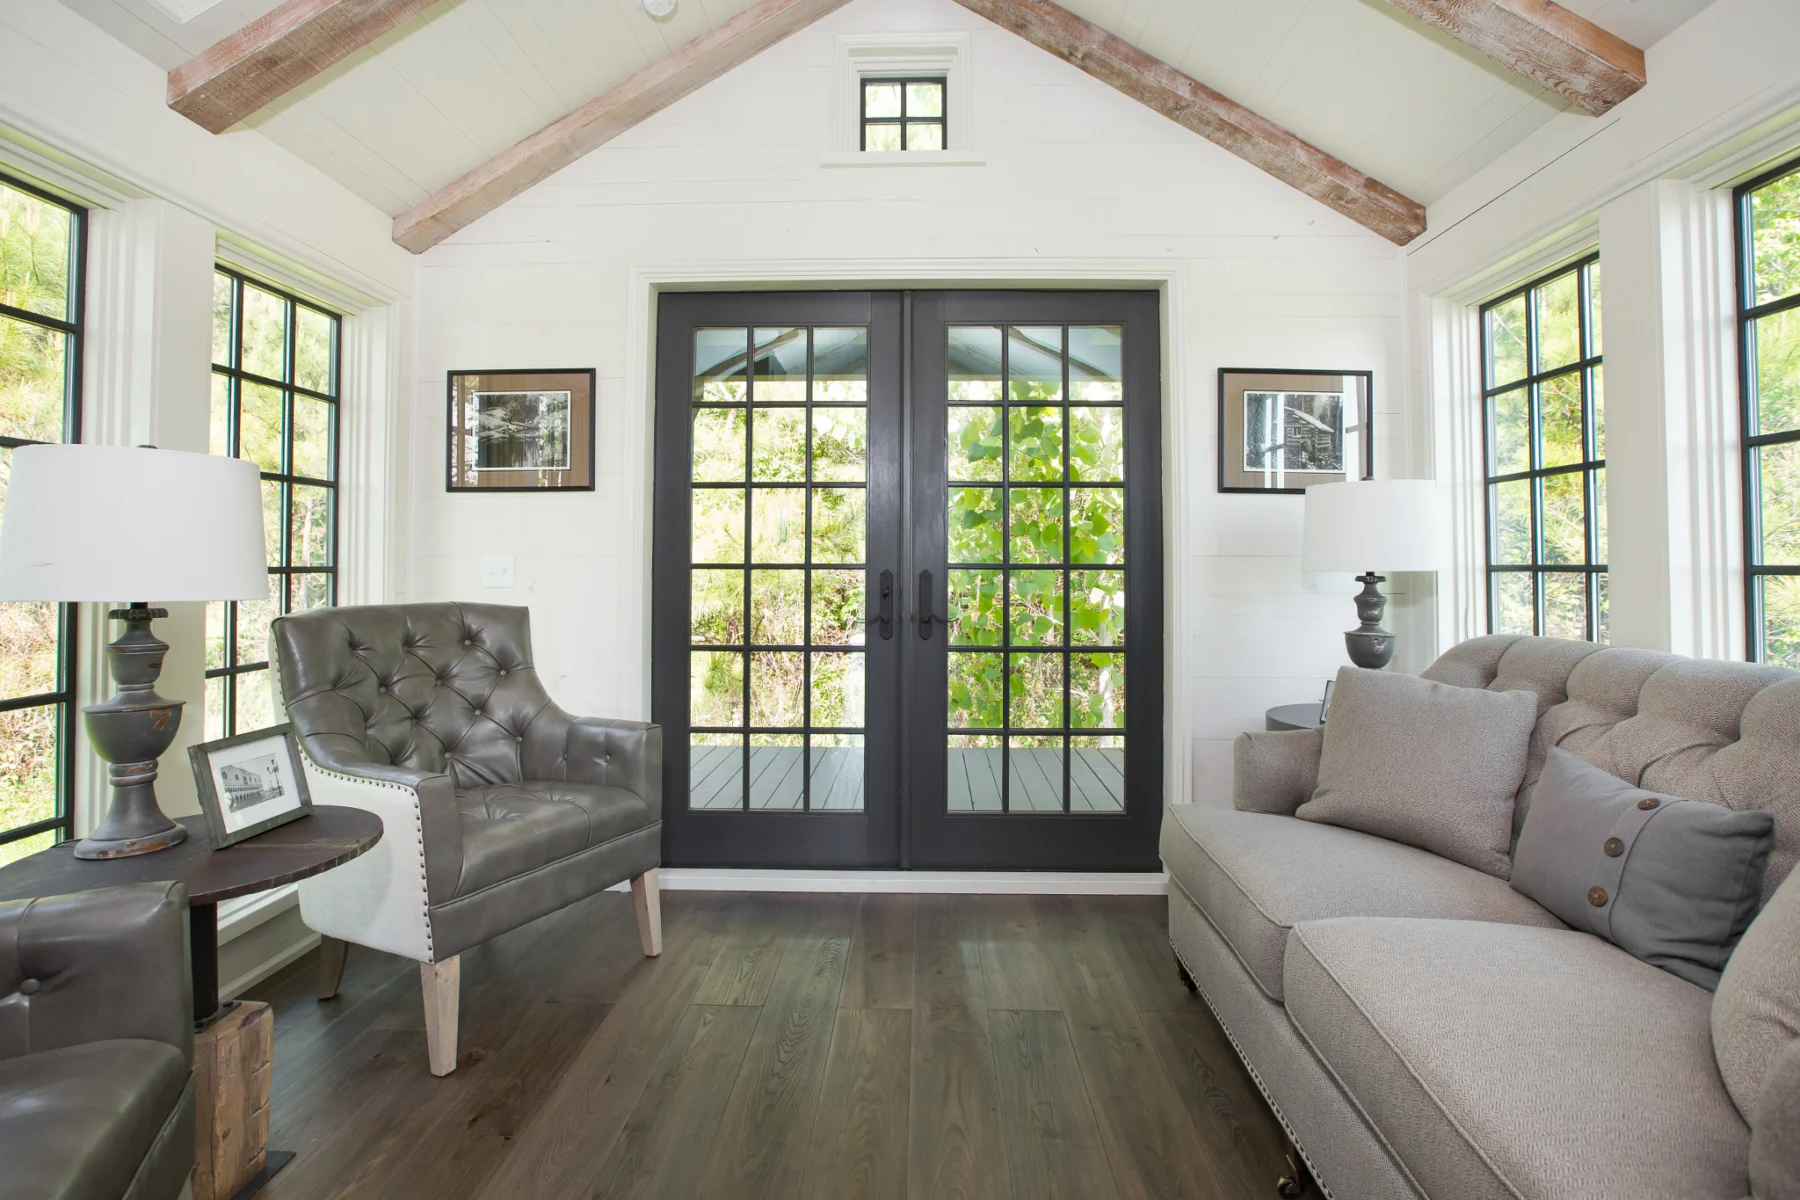 Vaulted Ceilings - Low Country by Designer Cottages